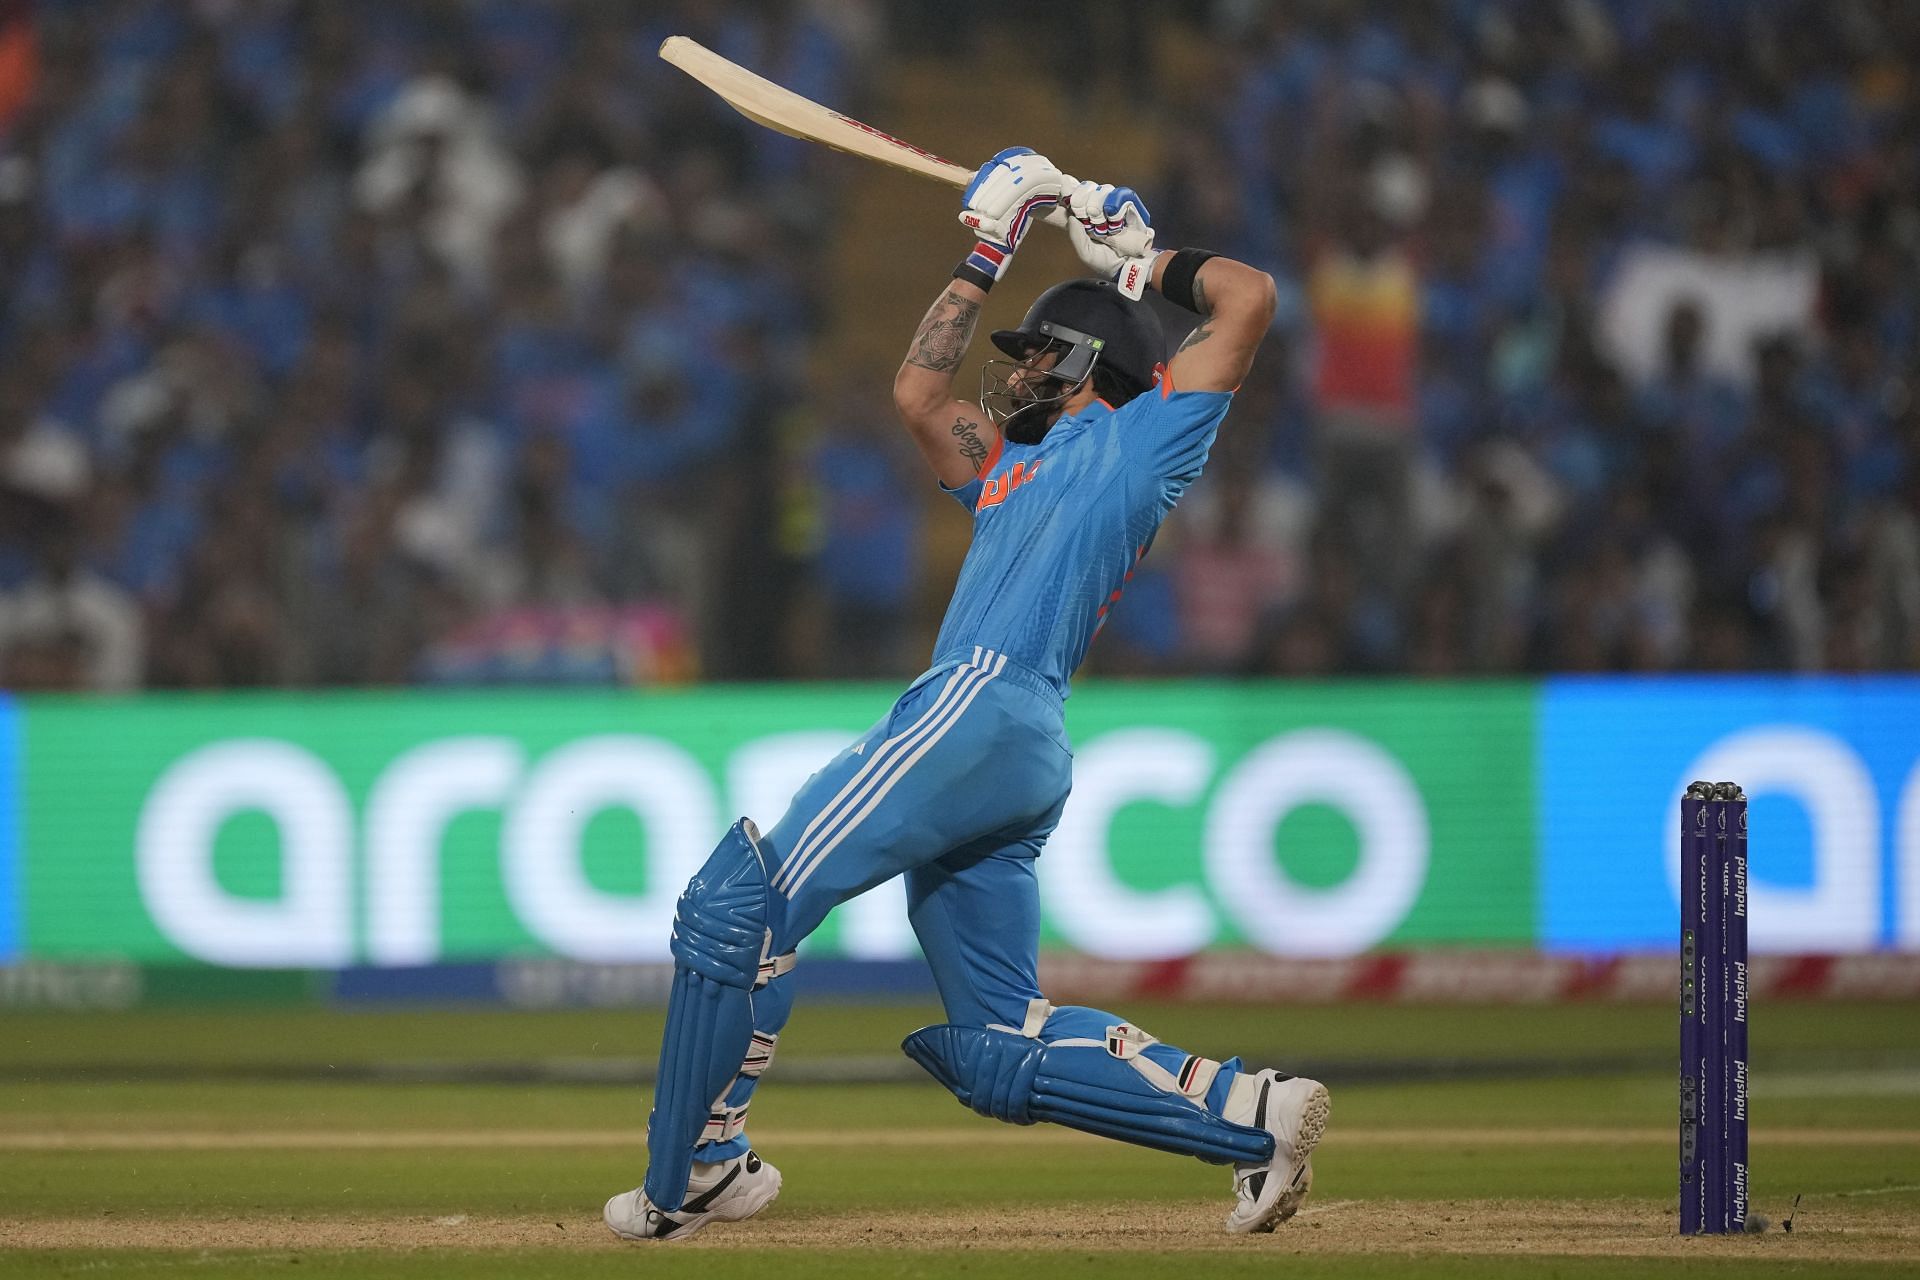 Virat Kohli struck six fours and four sixes during his innings. [P/C: AP]